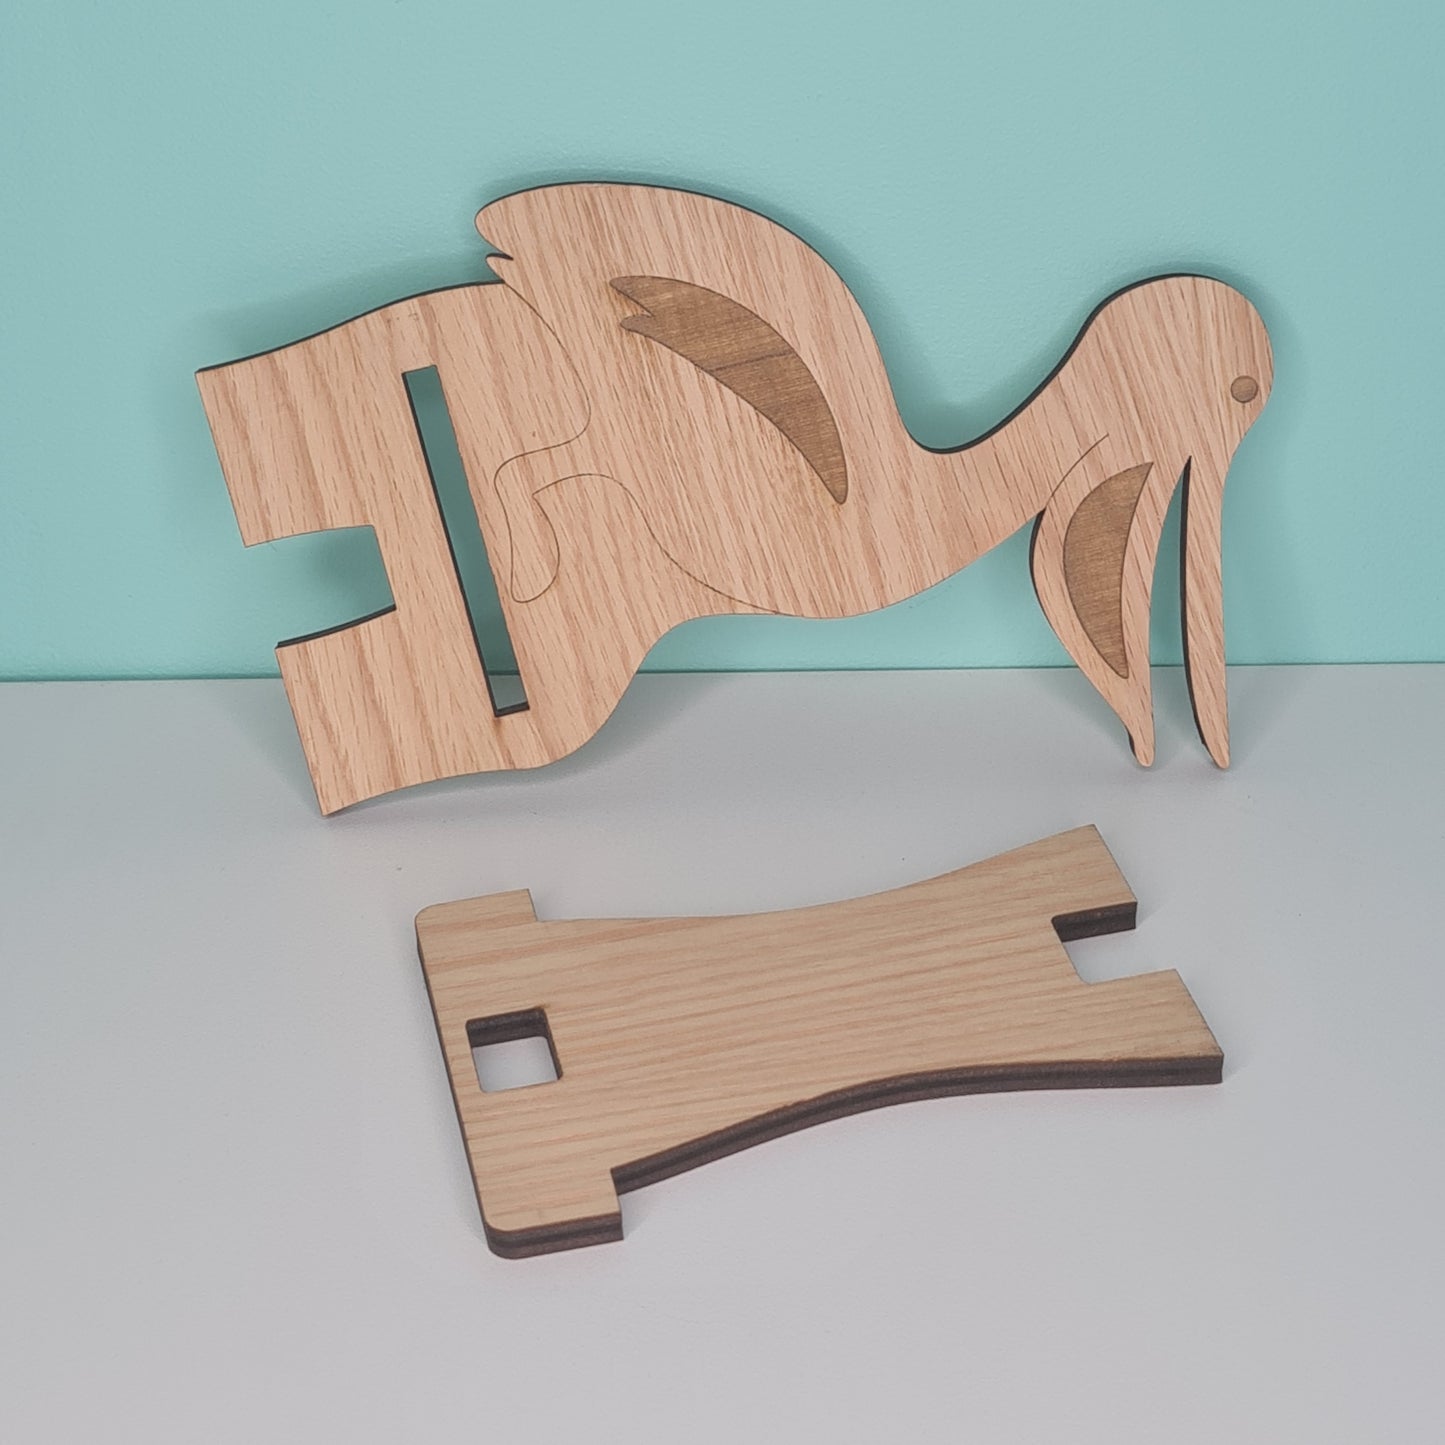 Pelican Mobile Phone Stand